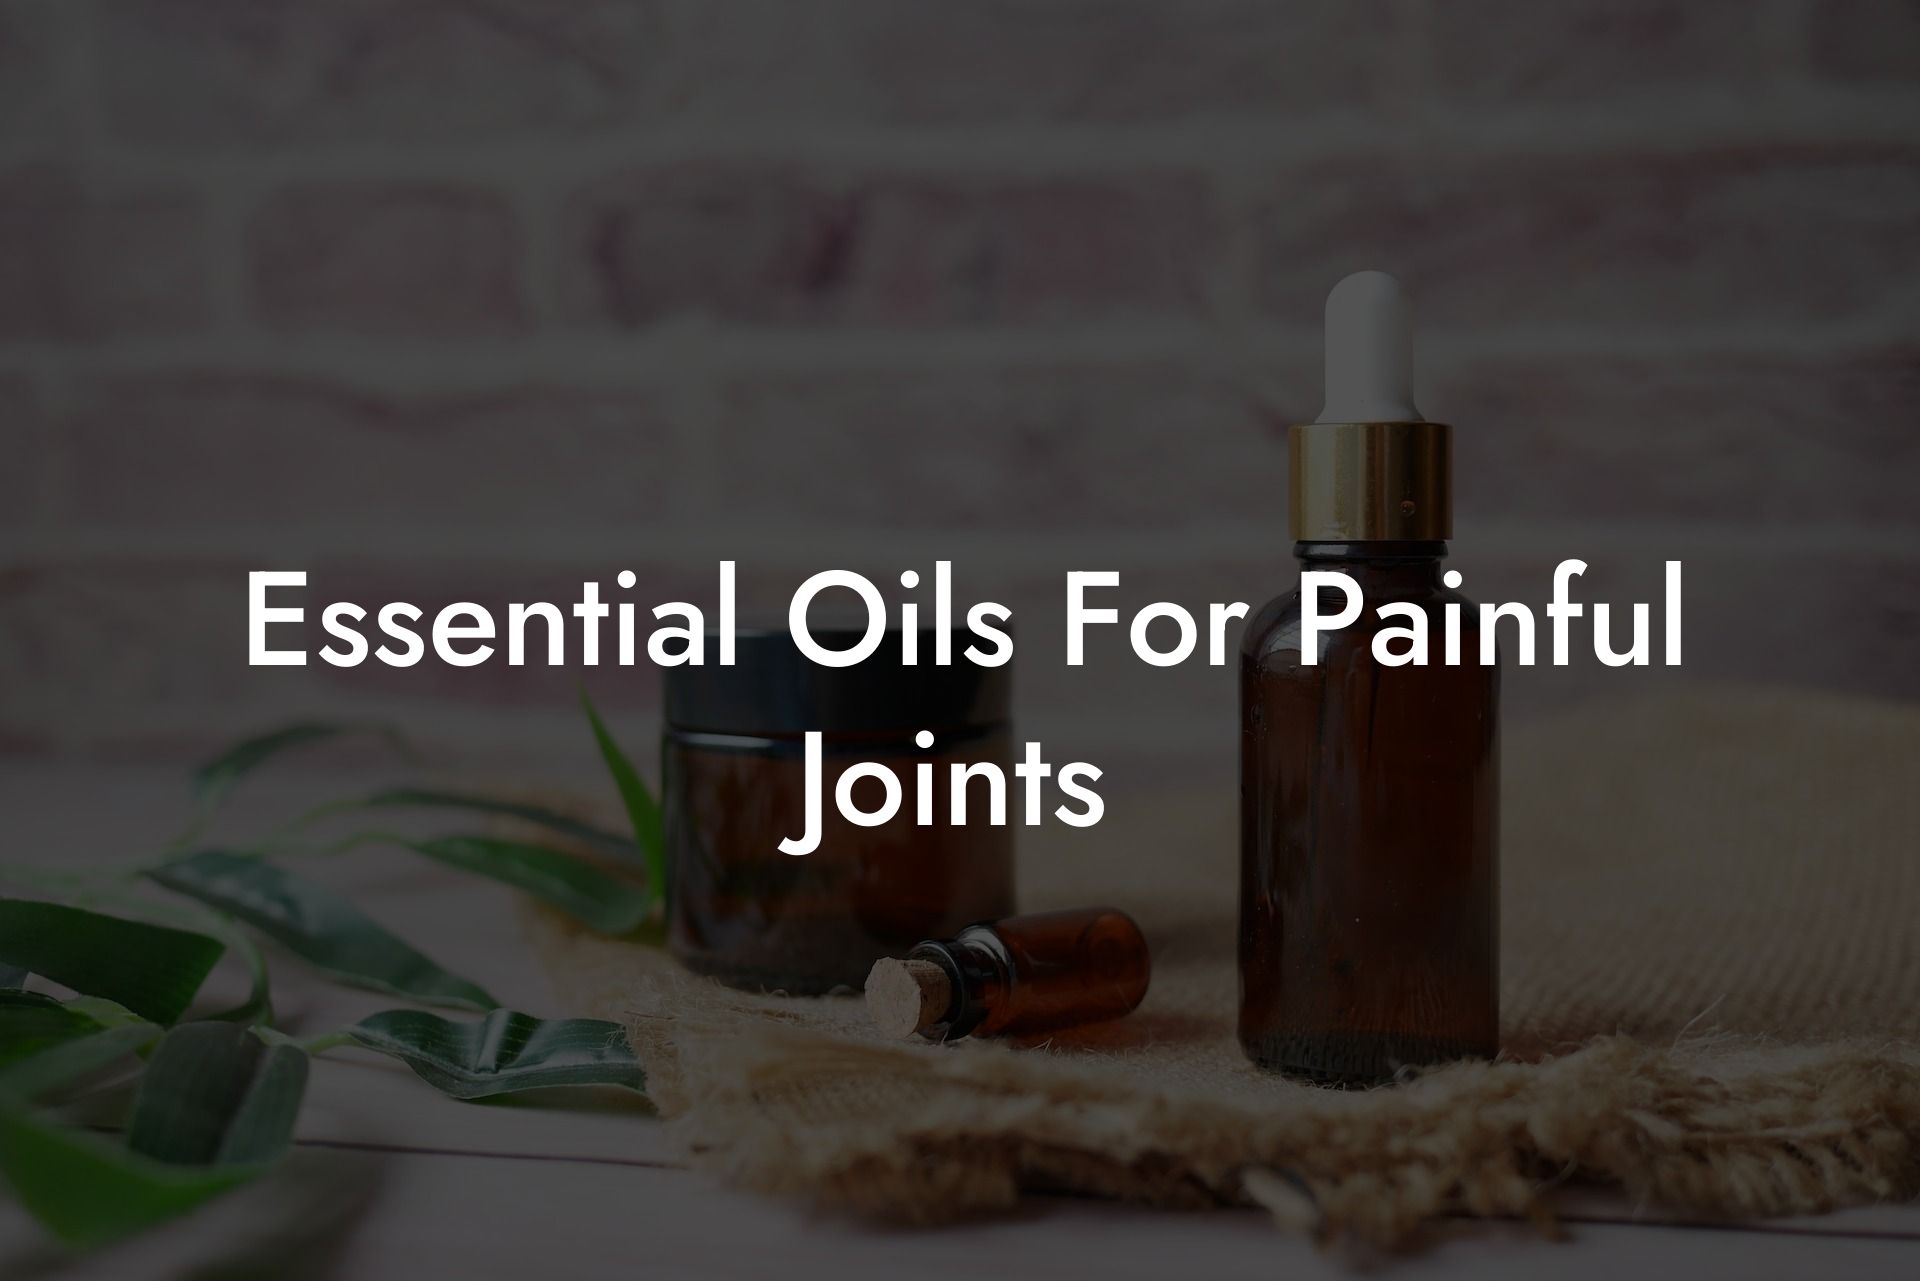 Essential Oils For Painful Joints